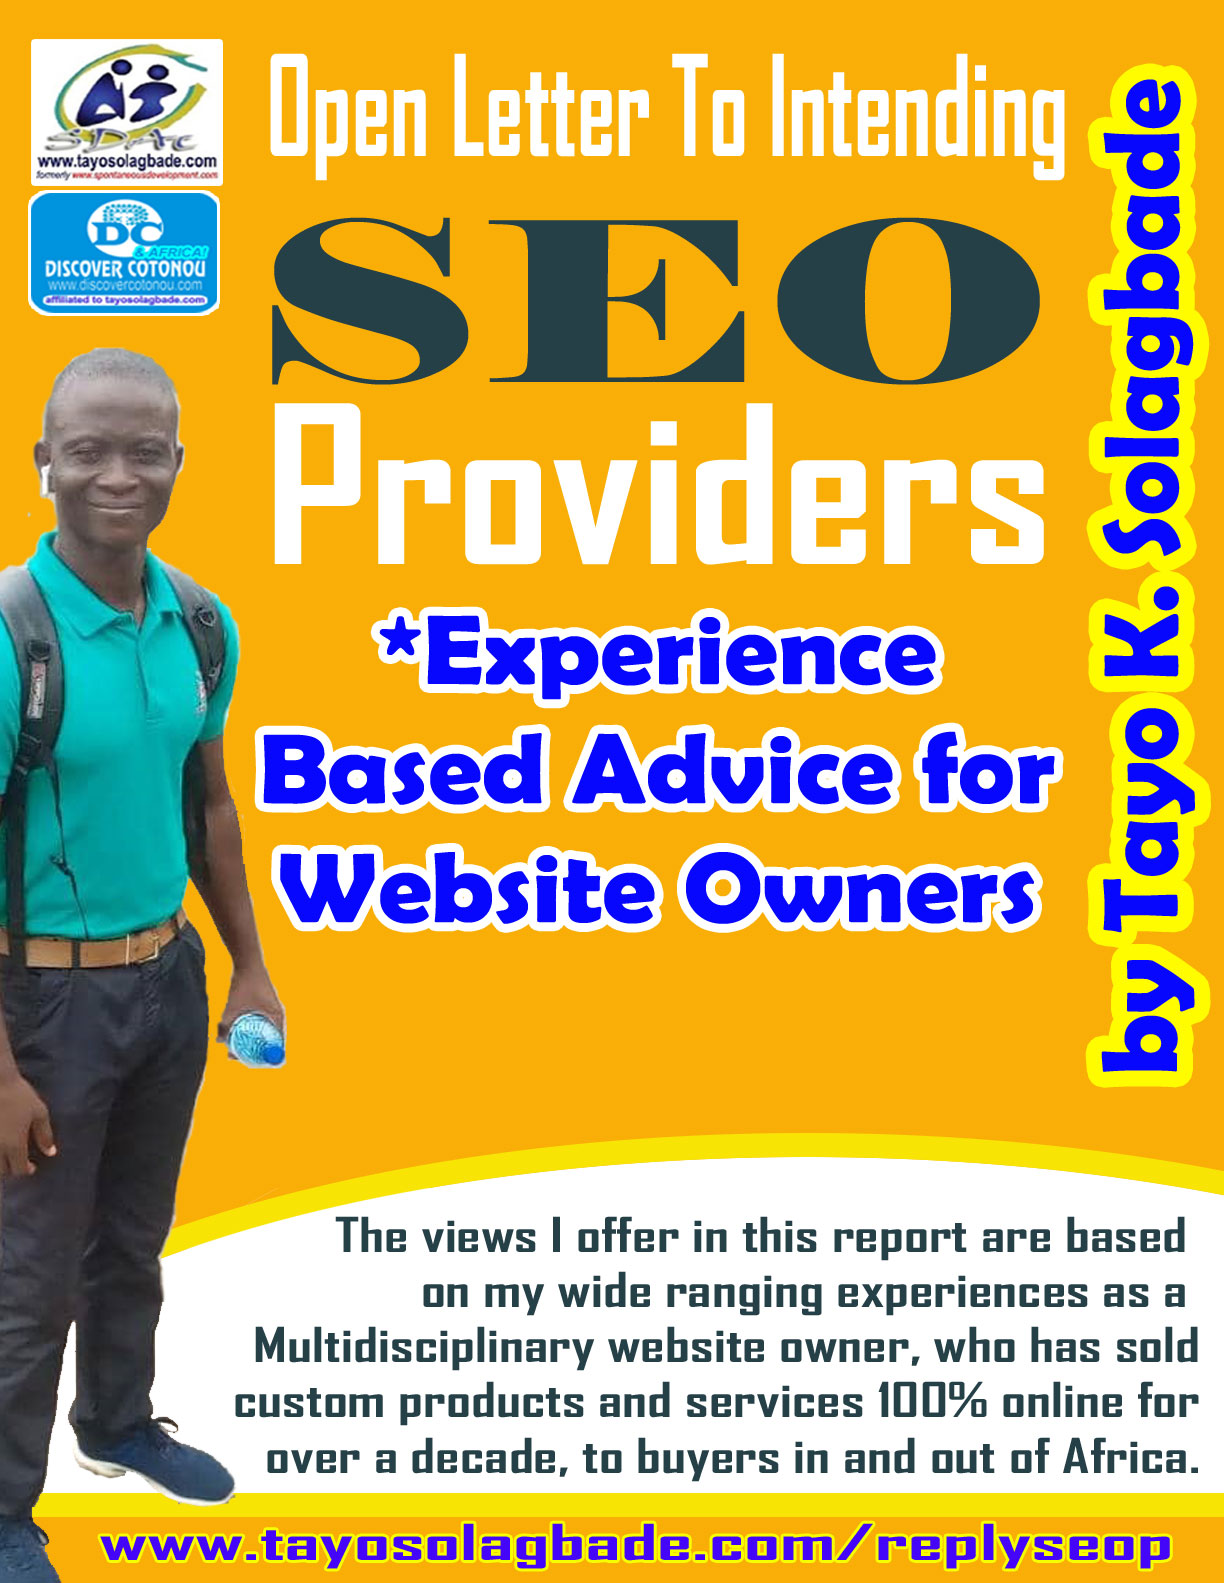 Open Letter to Intending SEO Provider = CLICK HERE TO DOWNLOAD THE FULL PDF REPORT...